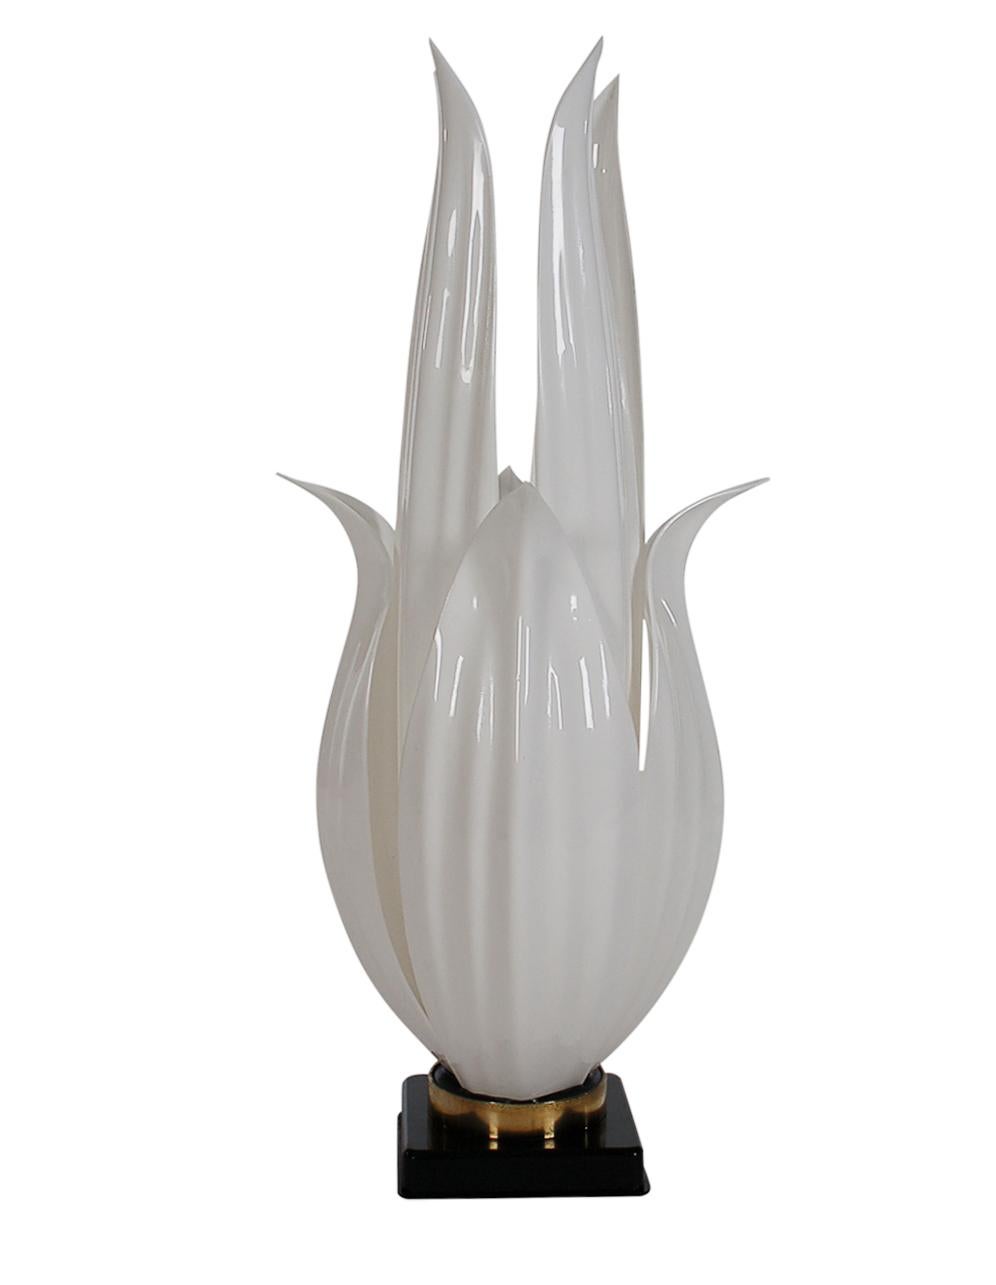 Canadian Mid-Century Modern Black and White Flower Form Acrylic Table Lamp by Rougier For Sale